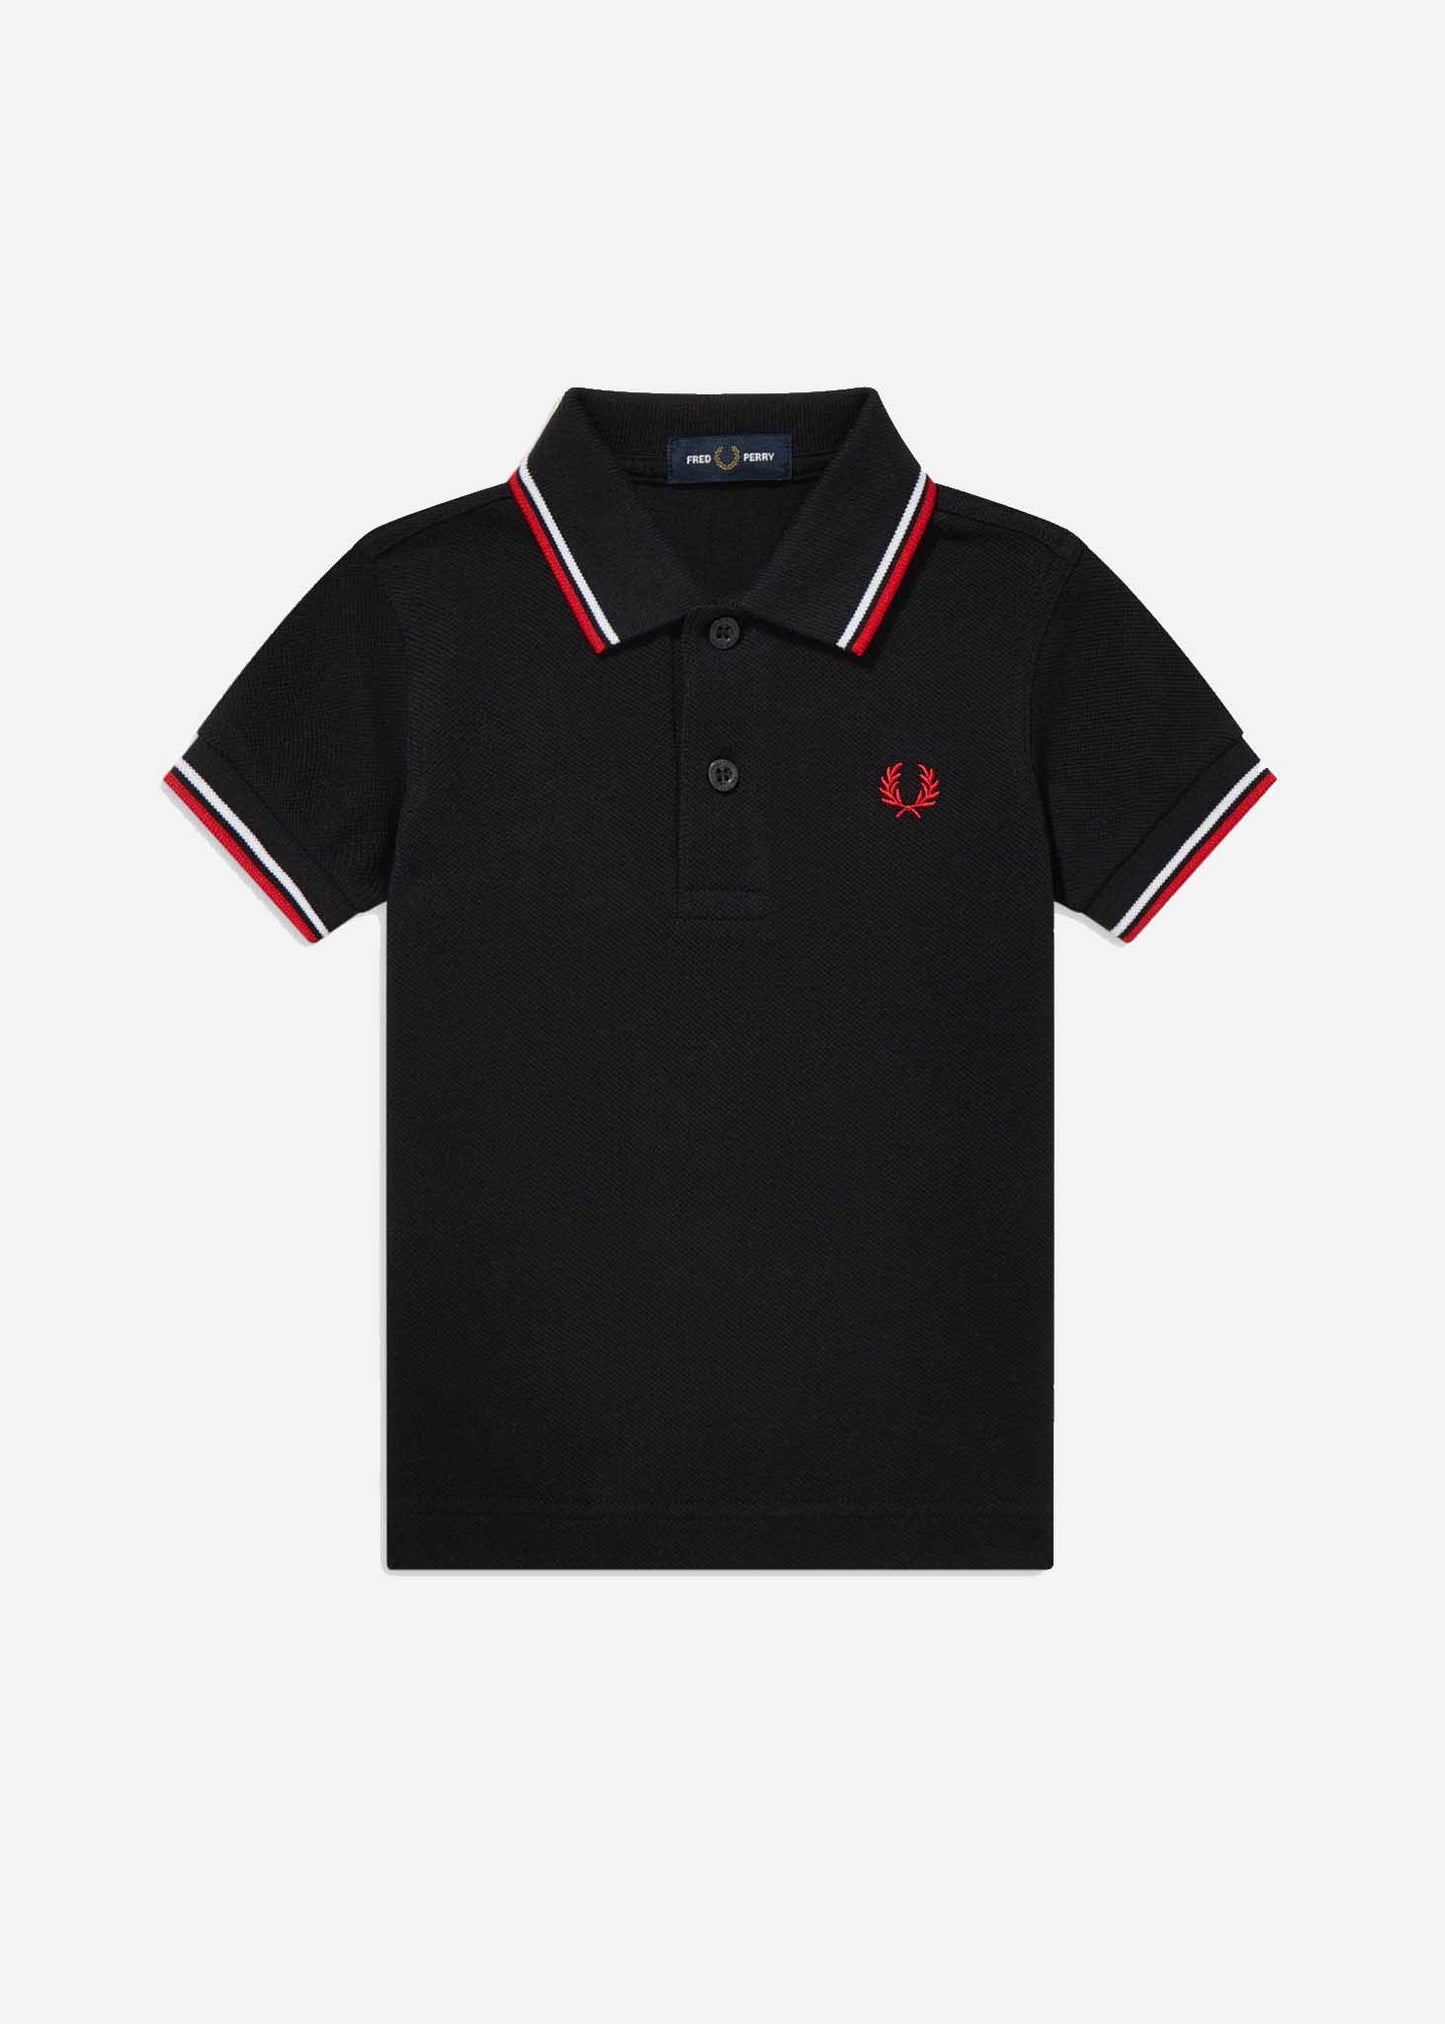 My first Fred Perry shirt - 471